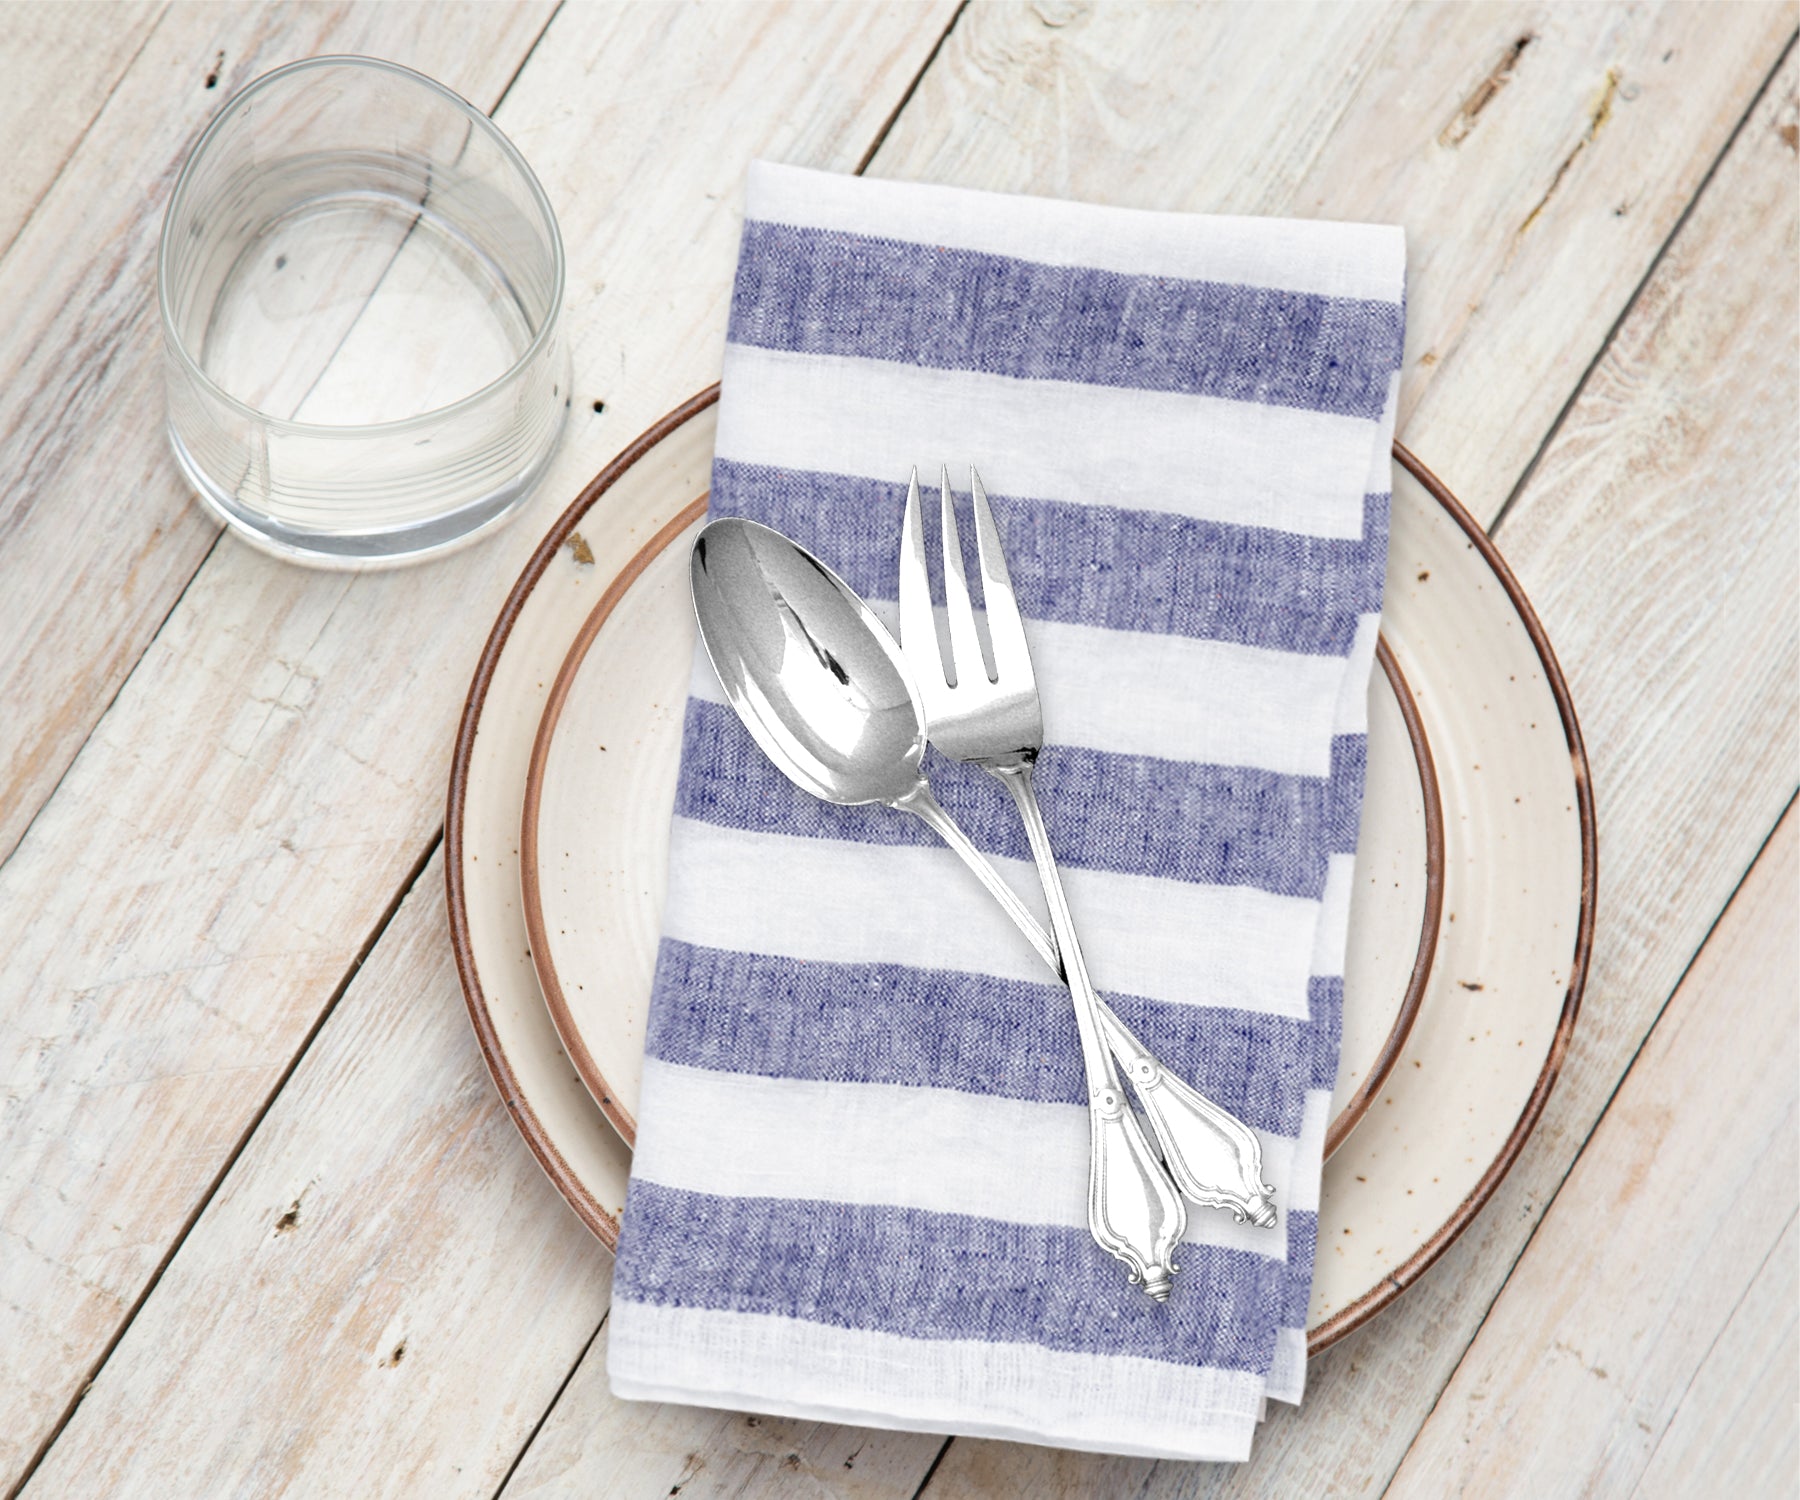 Simple and stylish linen napkins, versatile for any event from casual dinners to elegant affairs.